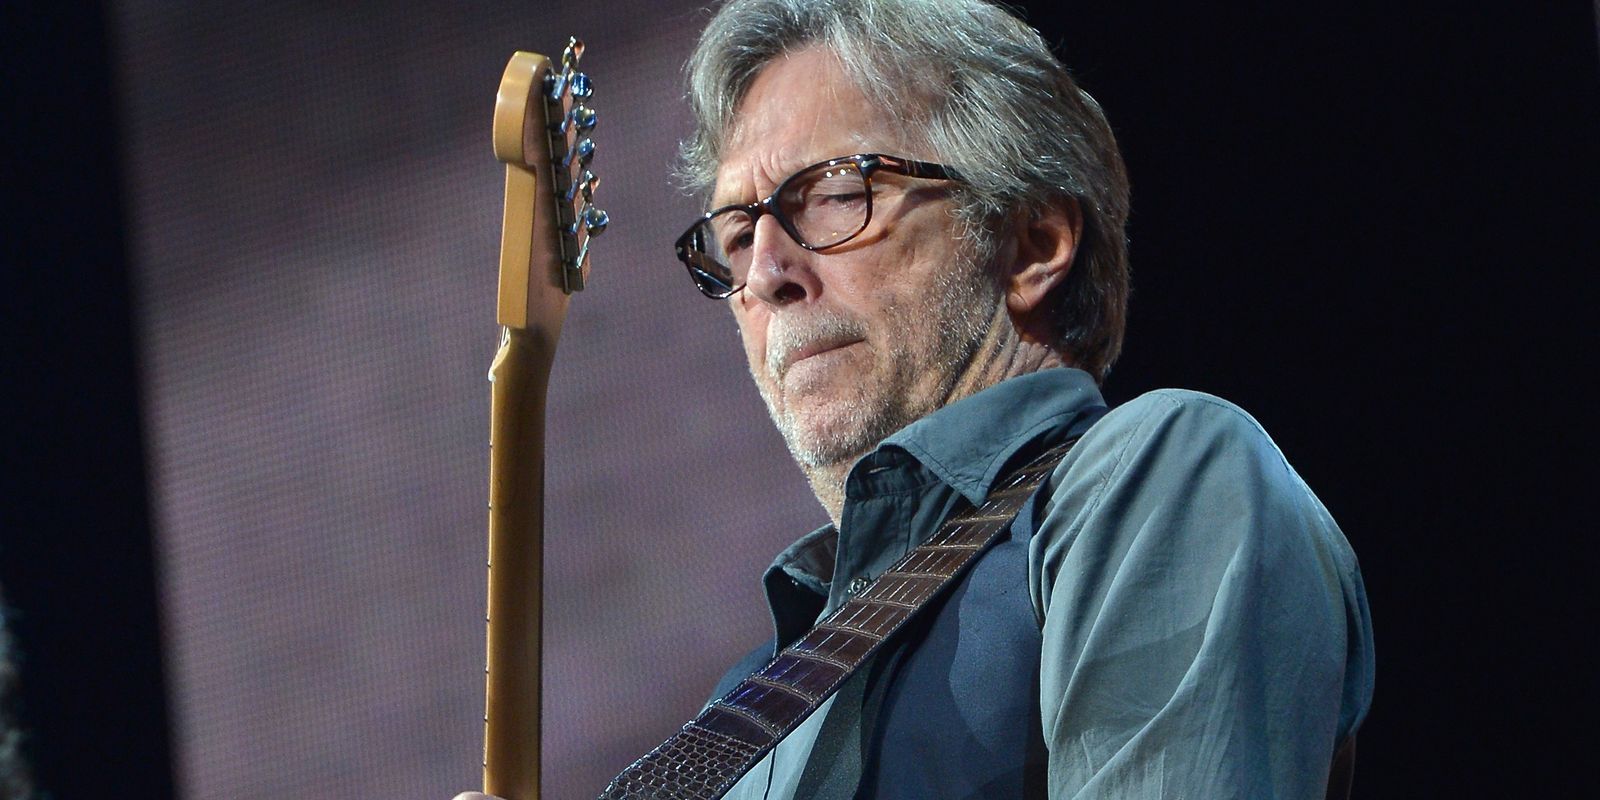 Watch the official trailer for the movie Eric Clapton Life in 12 Bars